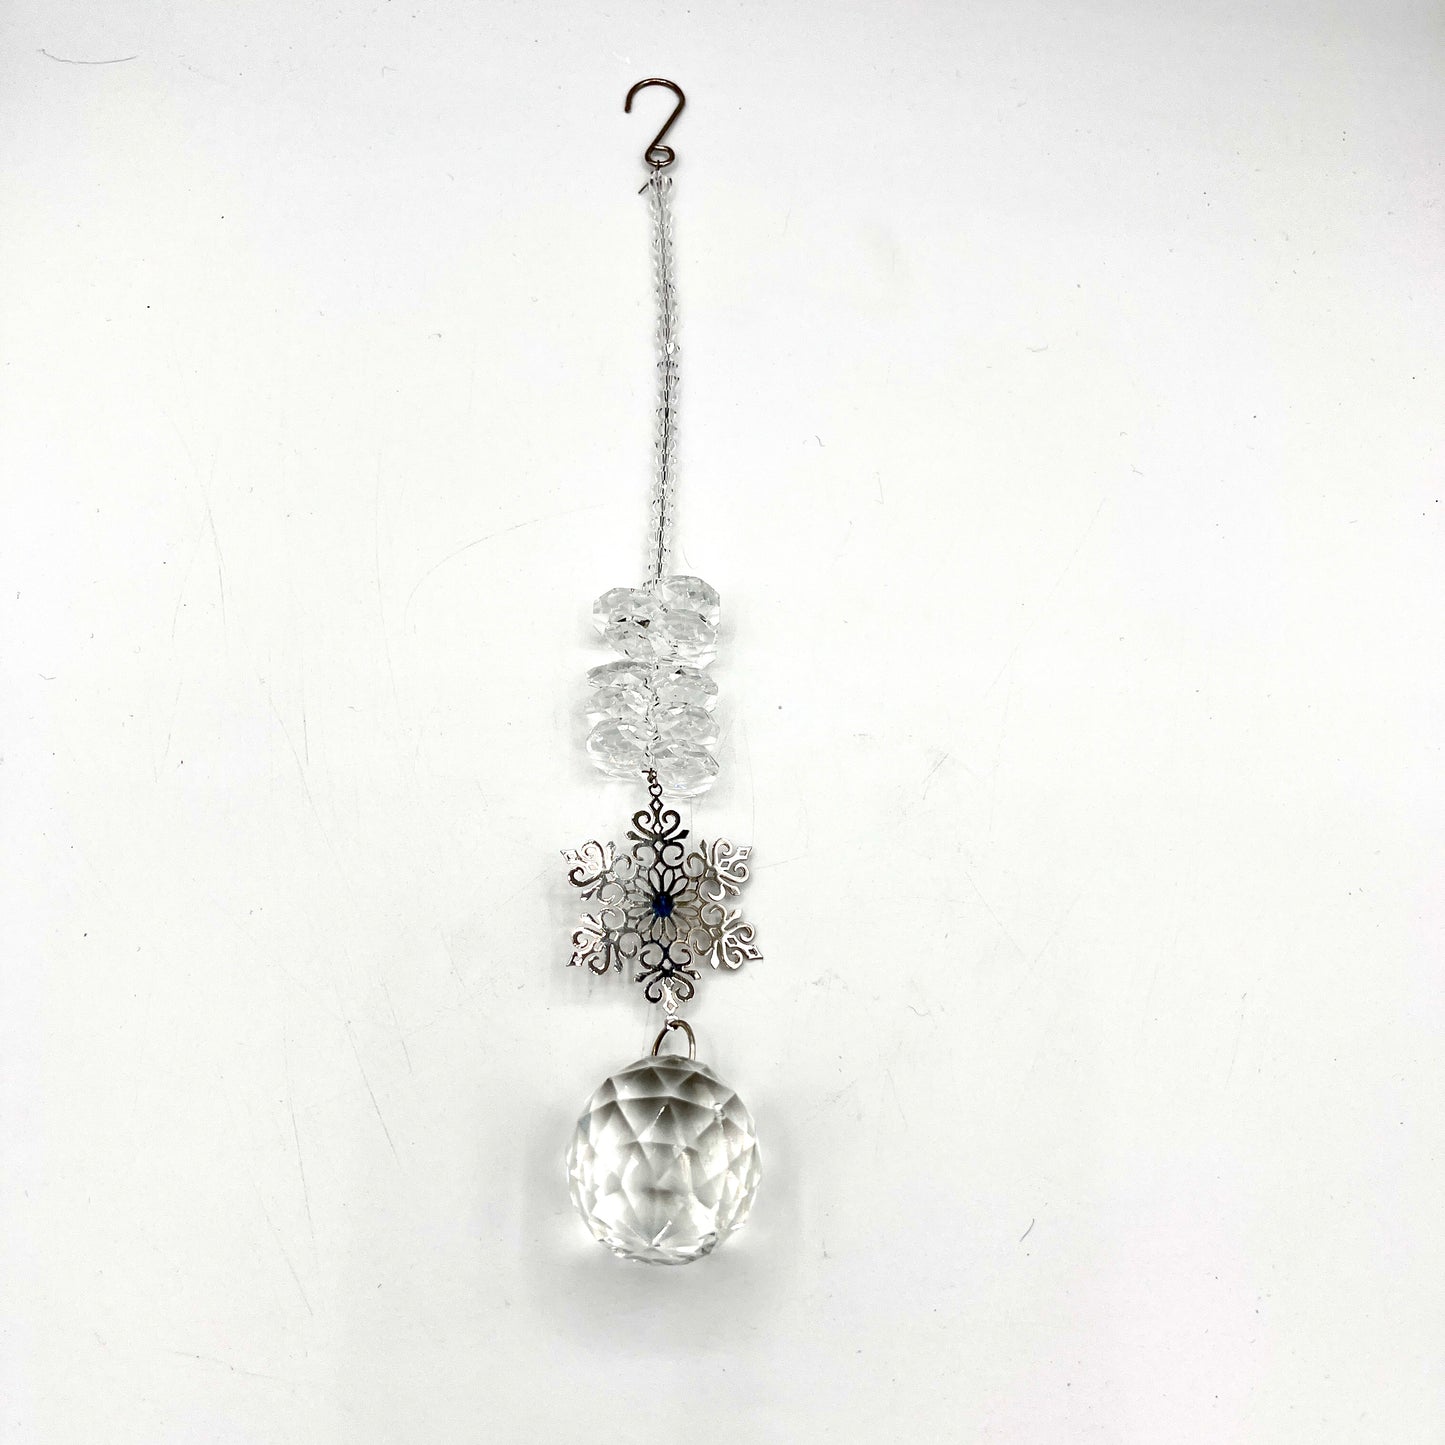 SILVER SNOWFLAKE CRYSTAL CLEAR HANGING SUN CATCHER ORNAMENT PRISM